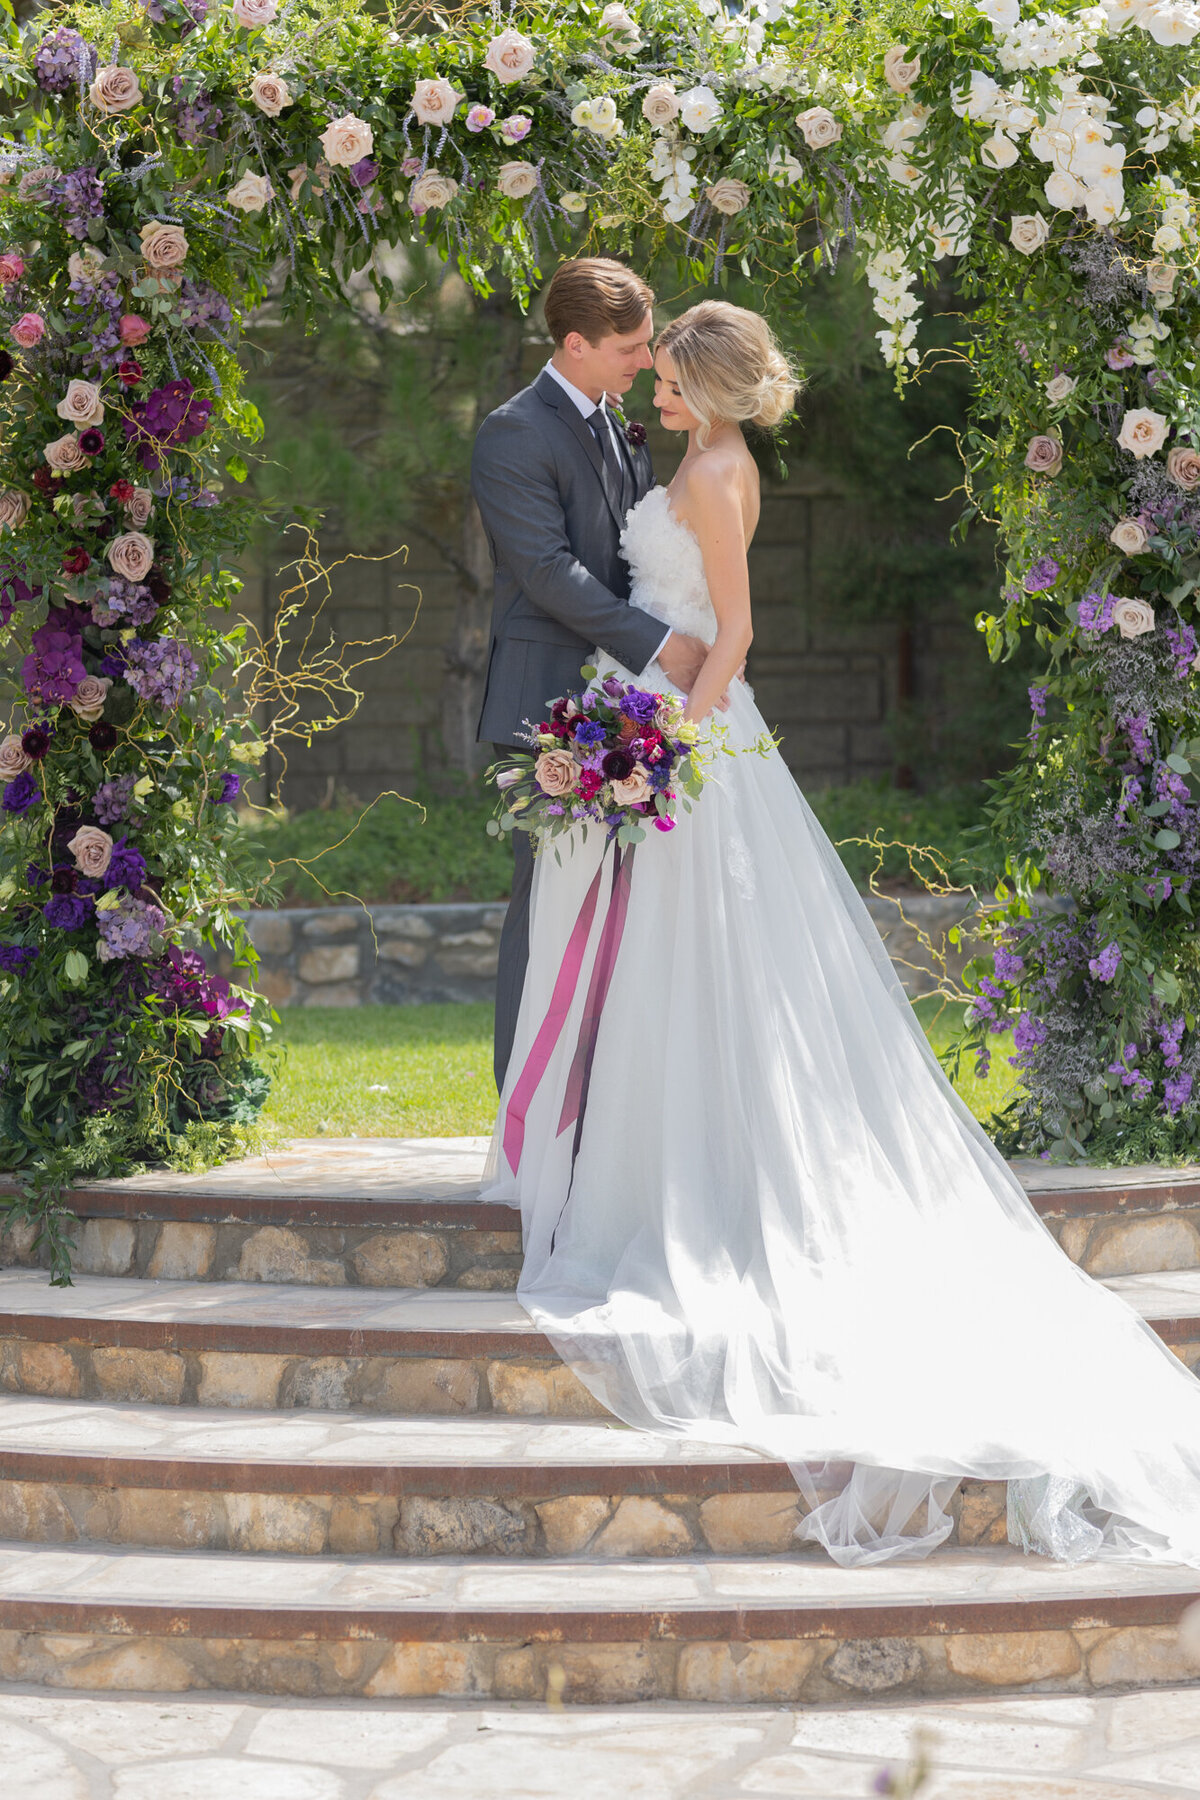 Bride and groom stand on steps under an arch of flowers